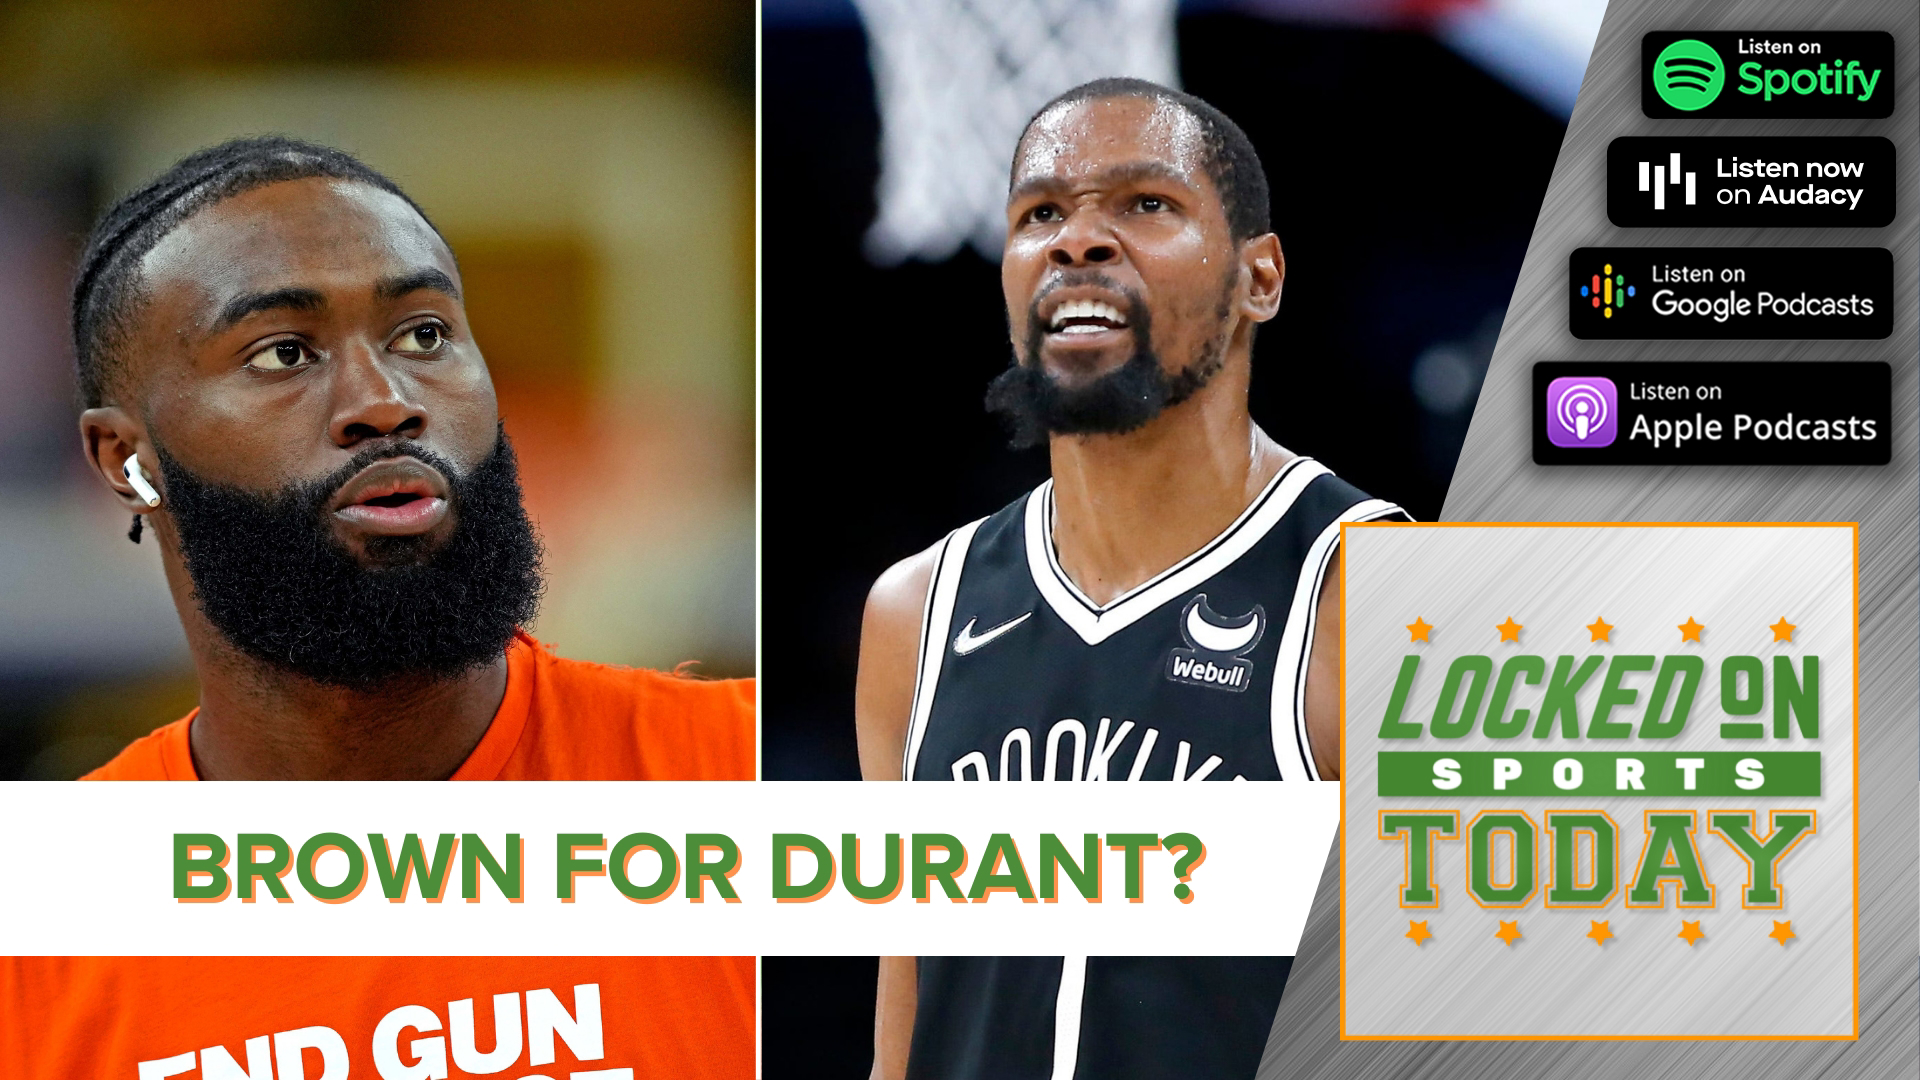 Discussing and debating the day's top sports stories from Kevin Durant possibly going to the Boston Celtics to the Ravens ready to live up to the hype this season.